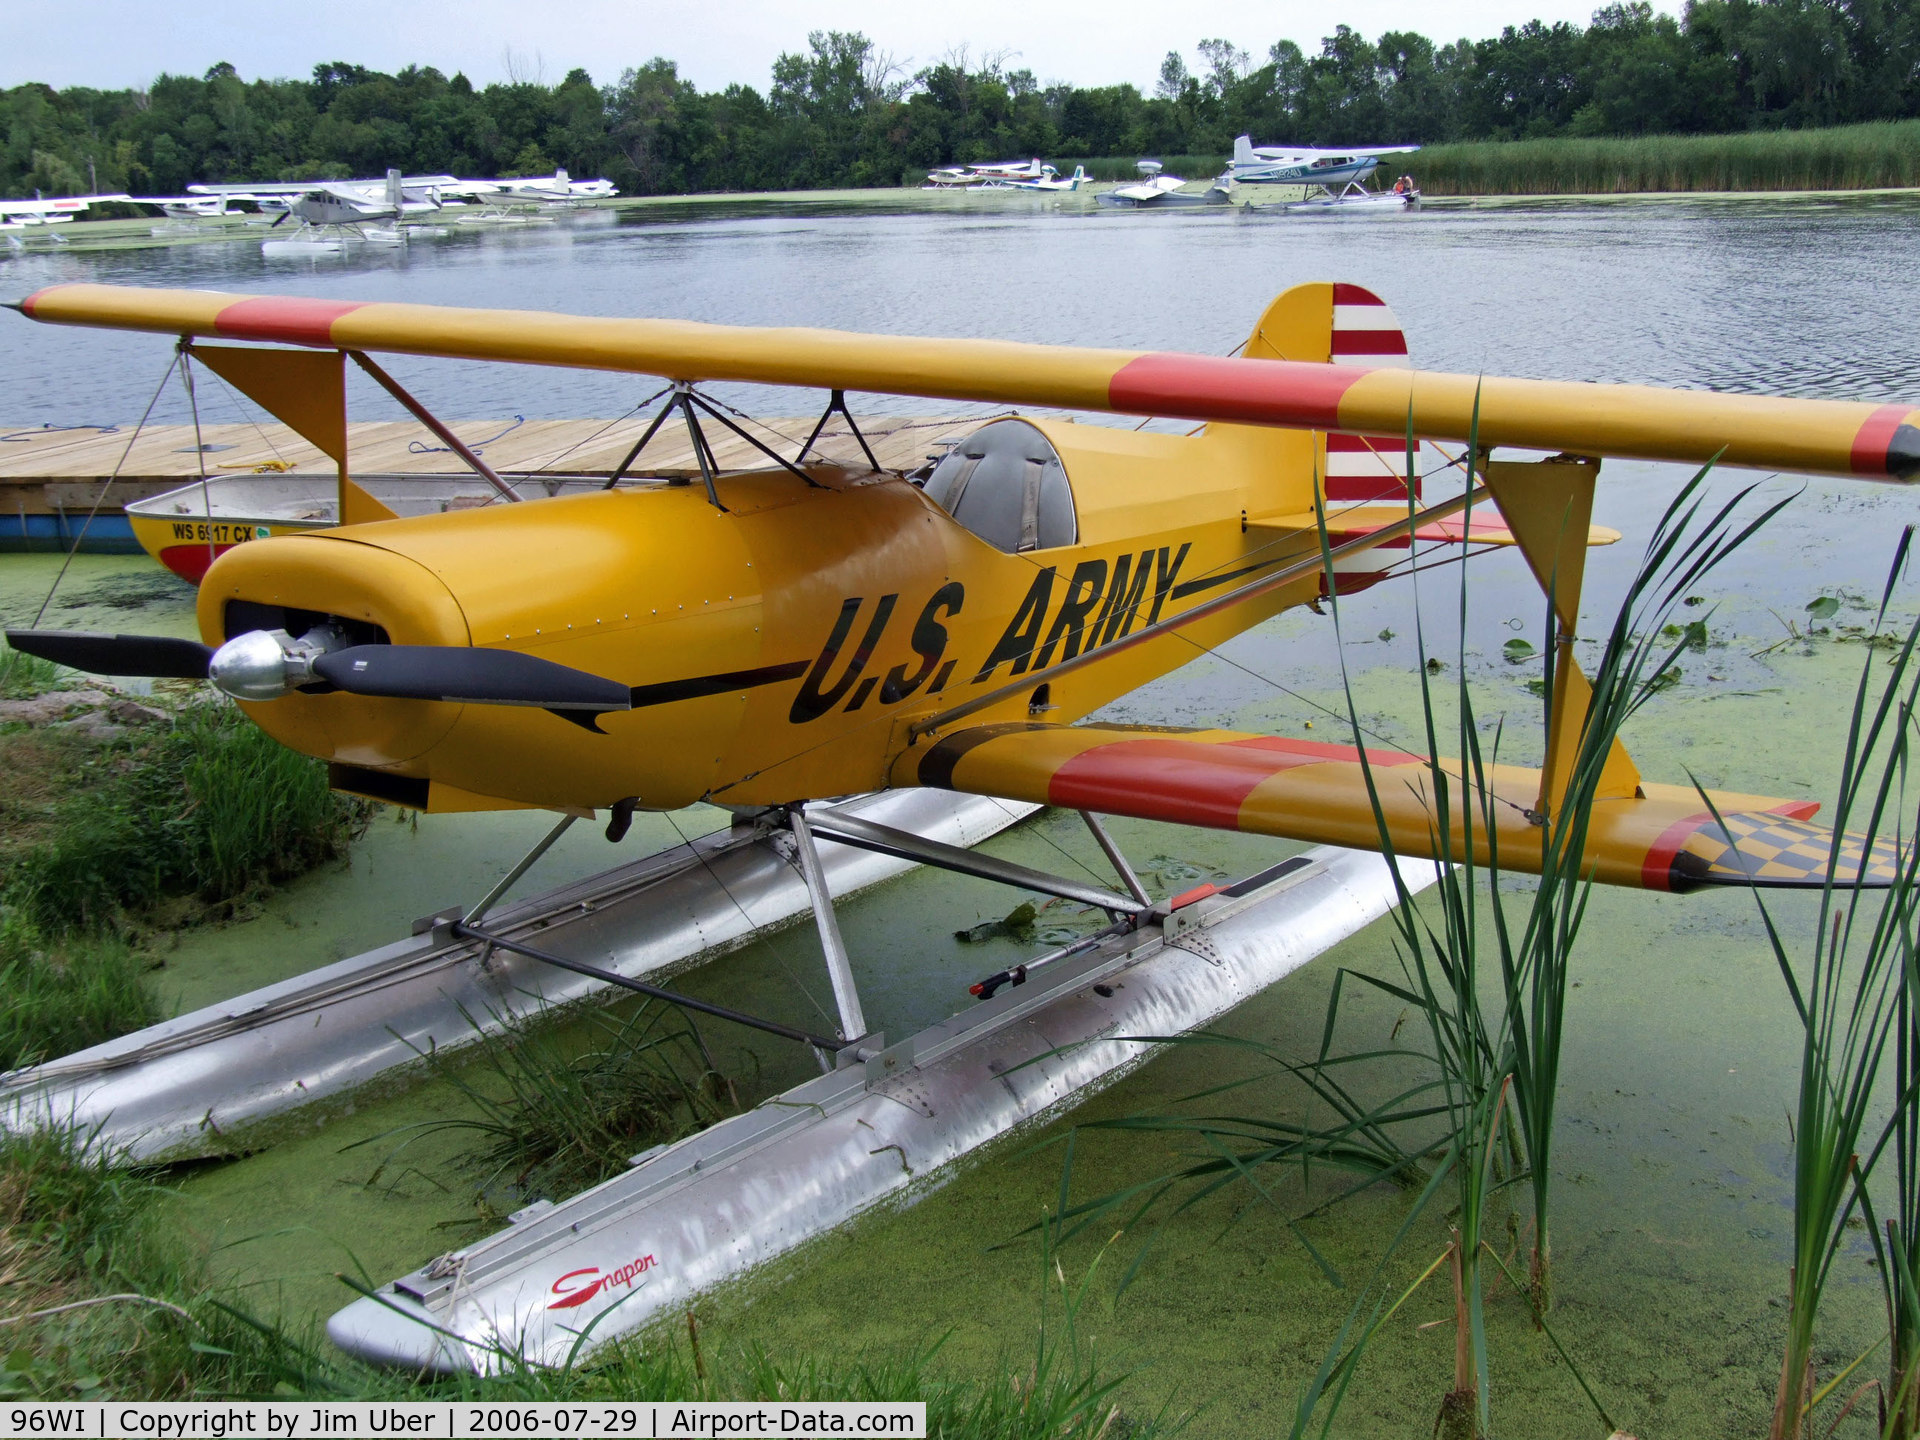 Vette/blust Seaplane Base (96WI) - another view of the 